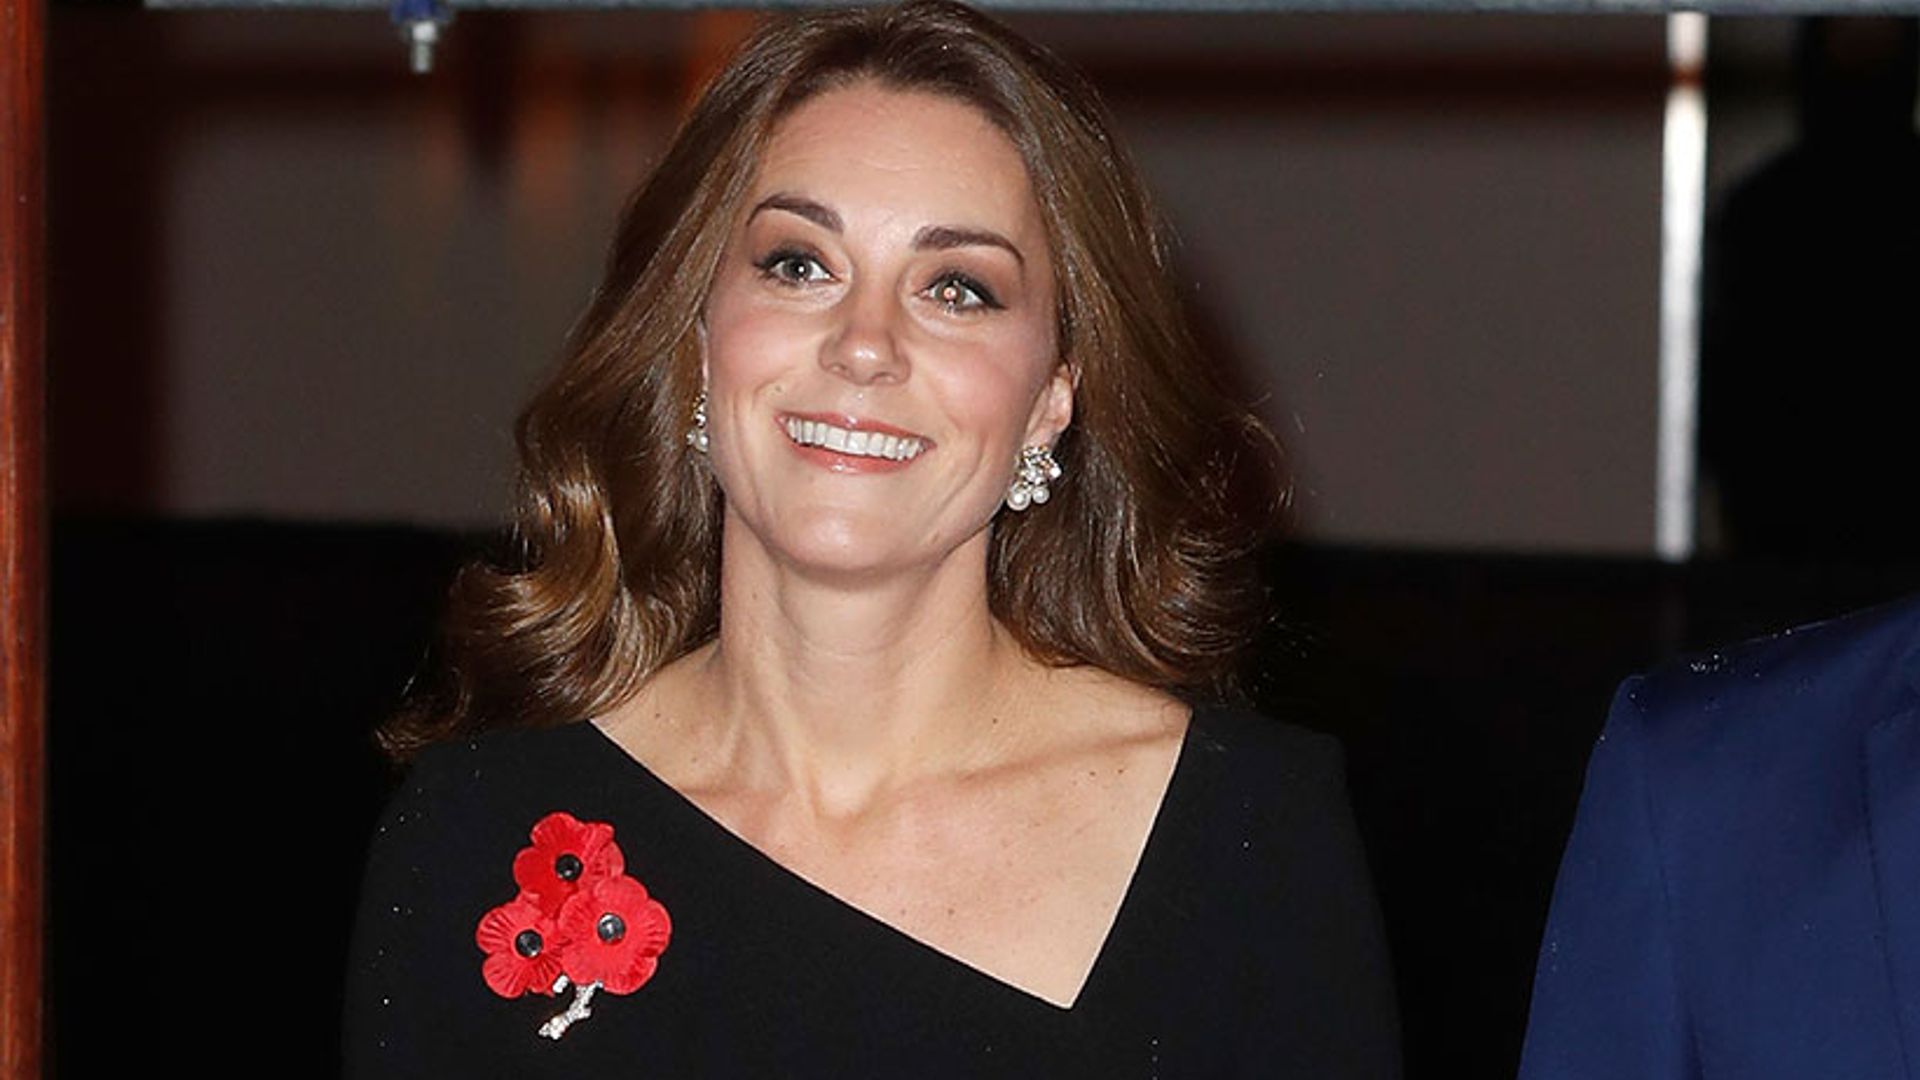 Duchess Kate is beautiful in black Roland Mouret at the Royal Festival of Remembrance